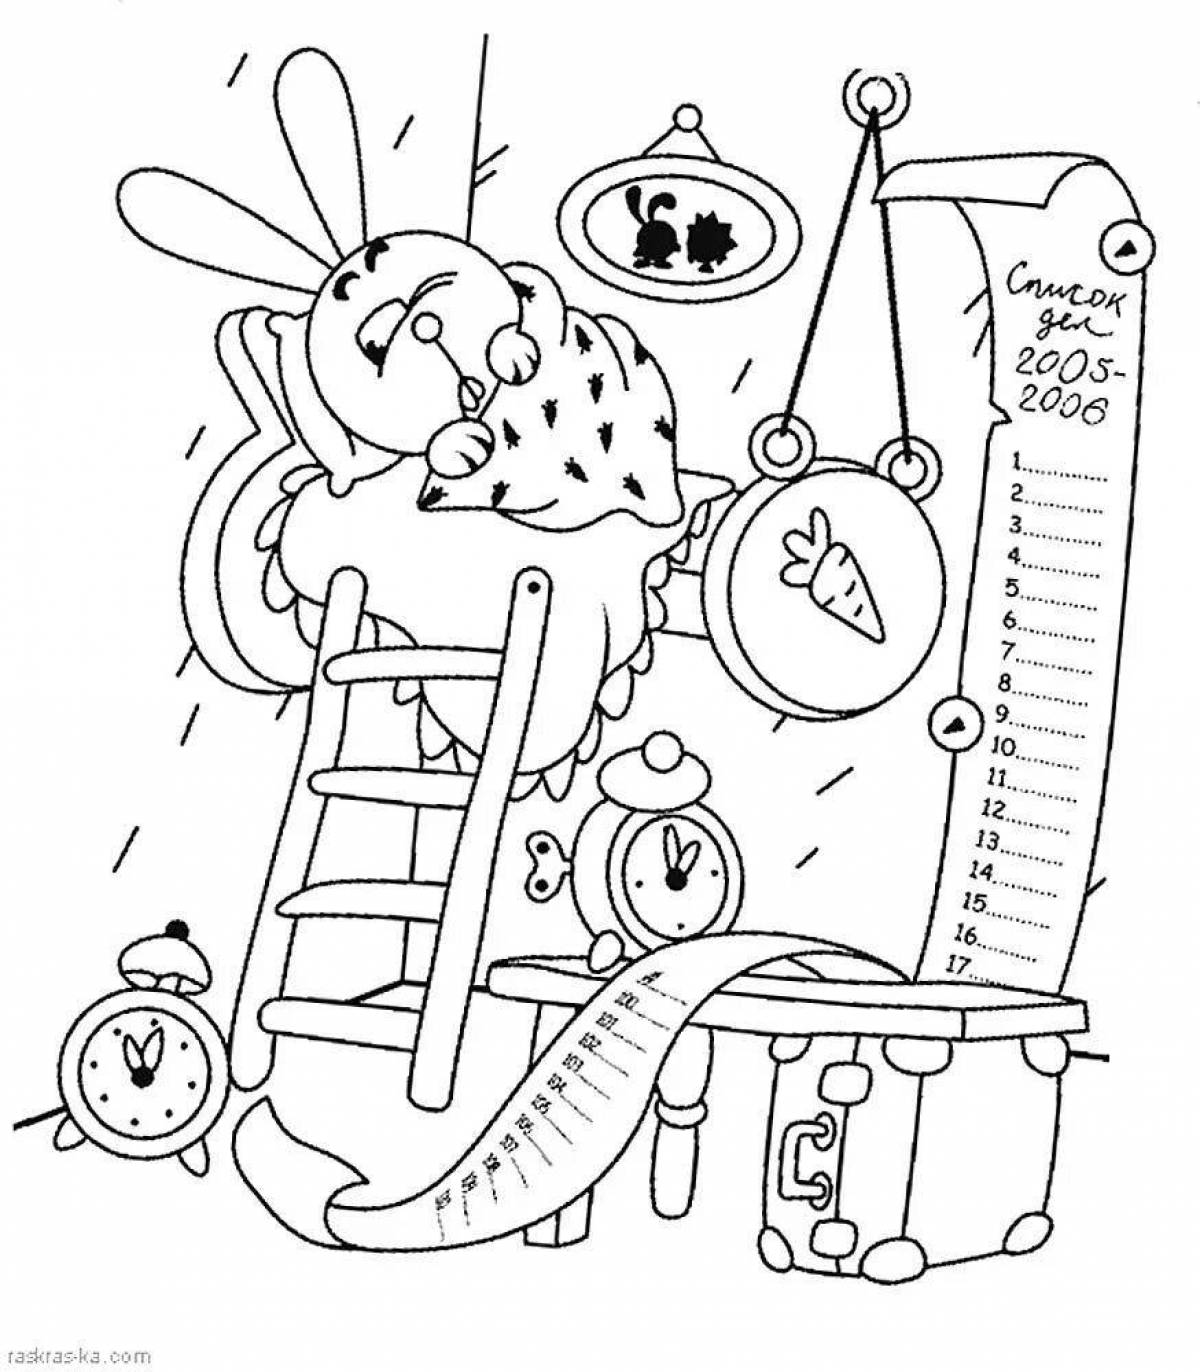 Attractive Smeshariki coloring pages